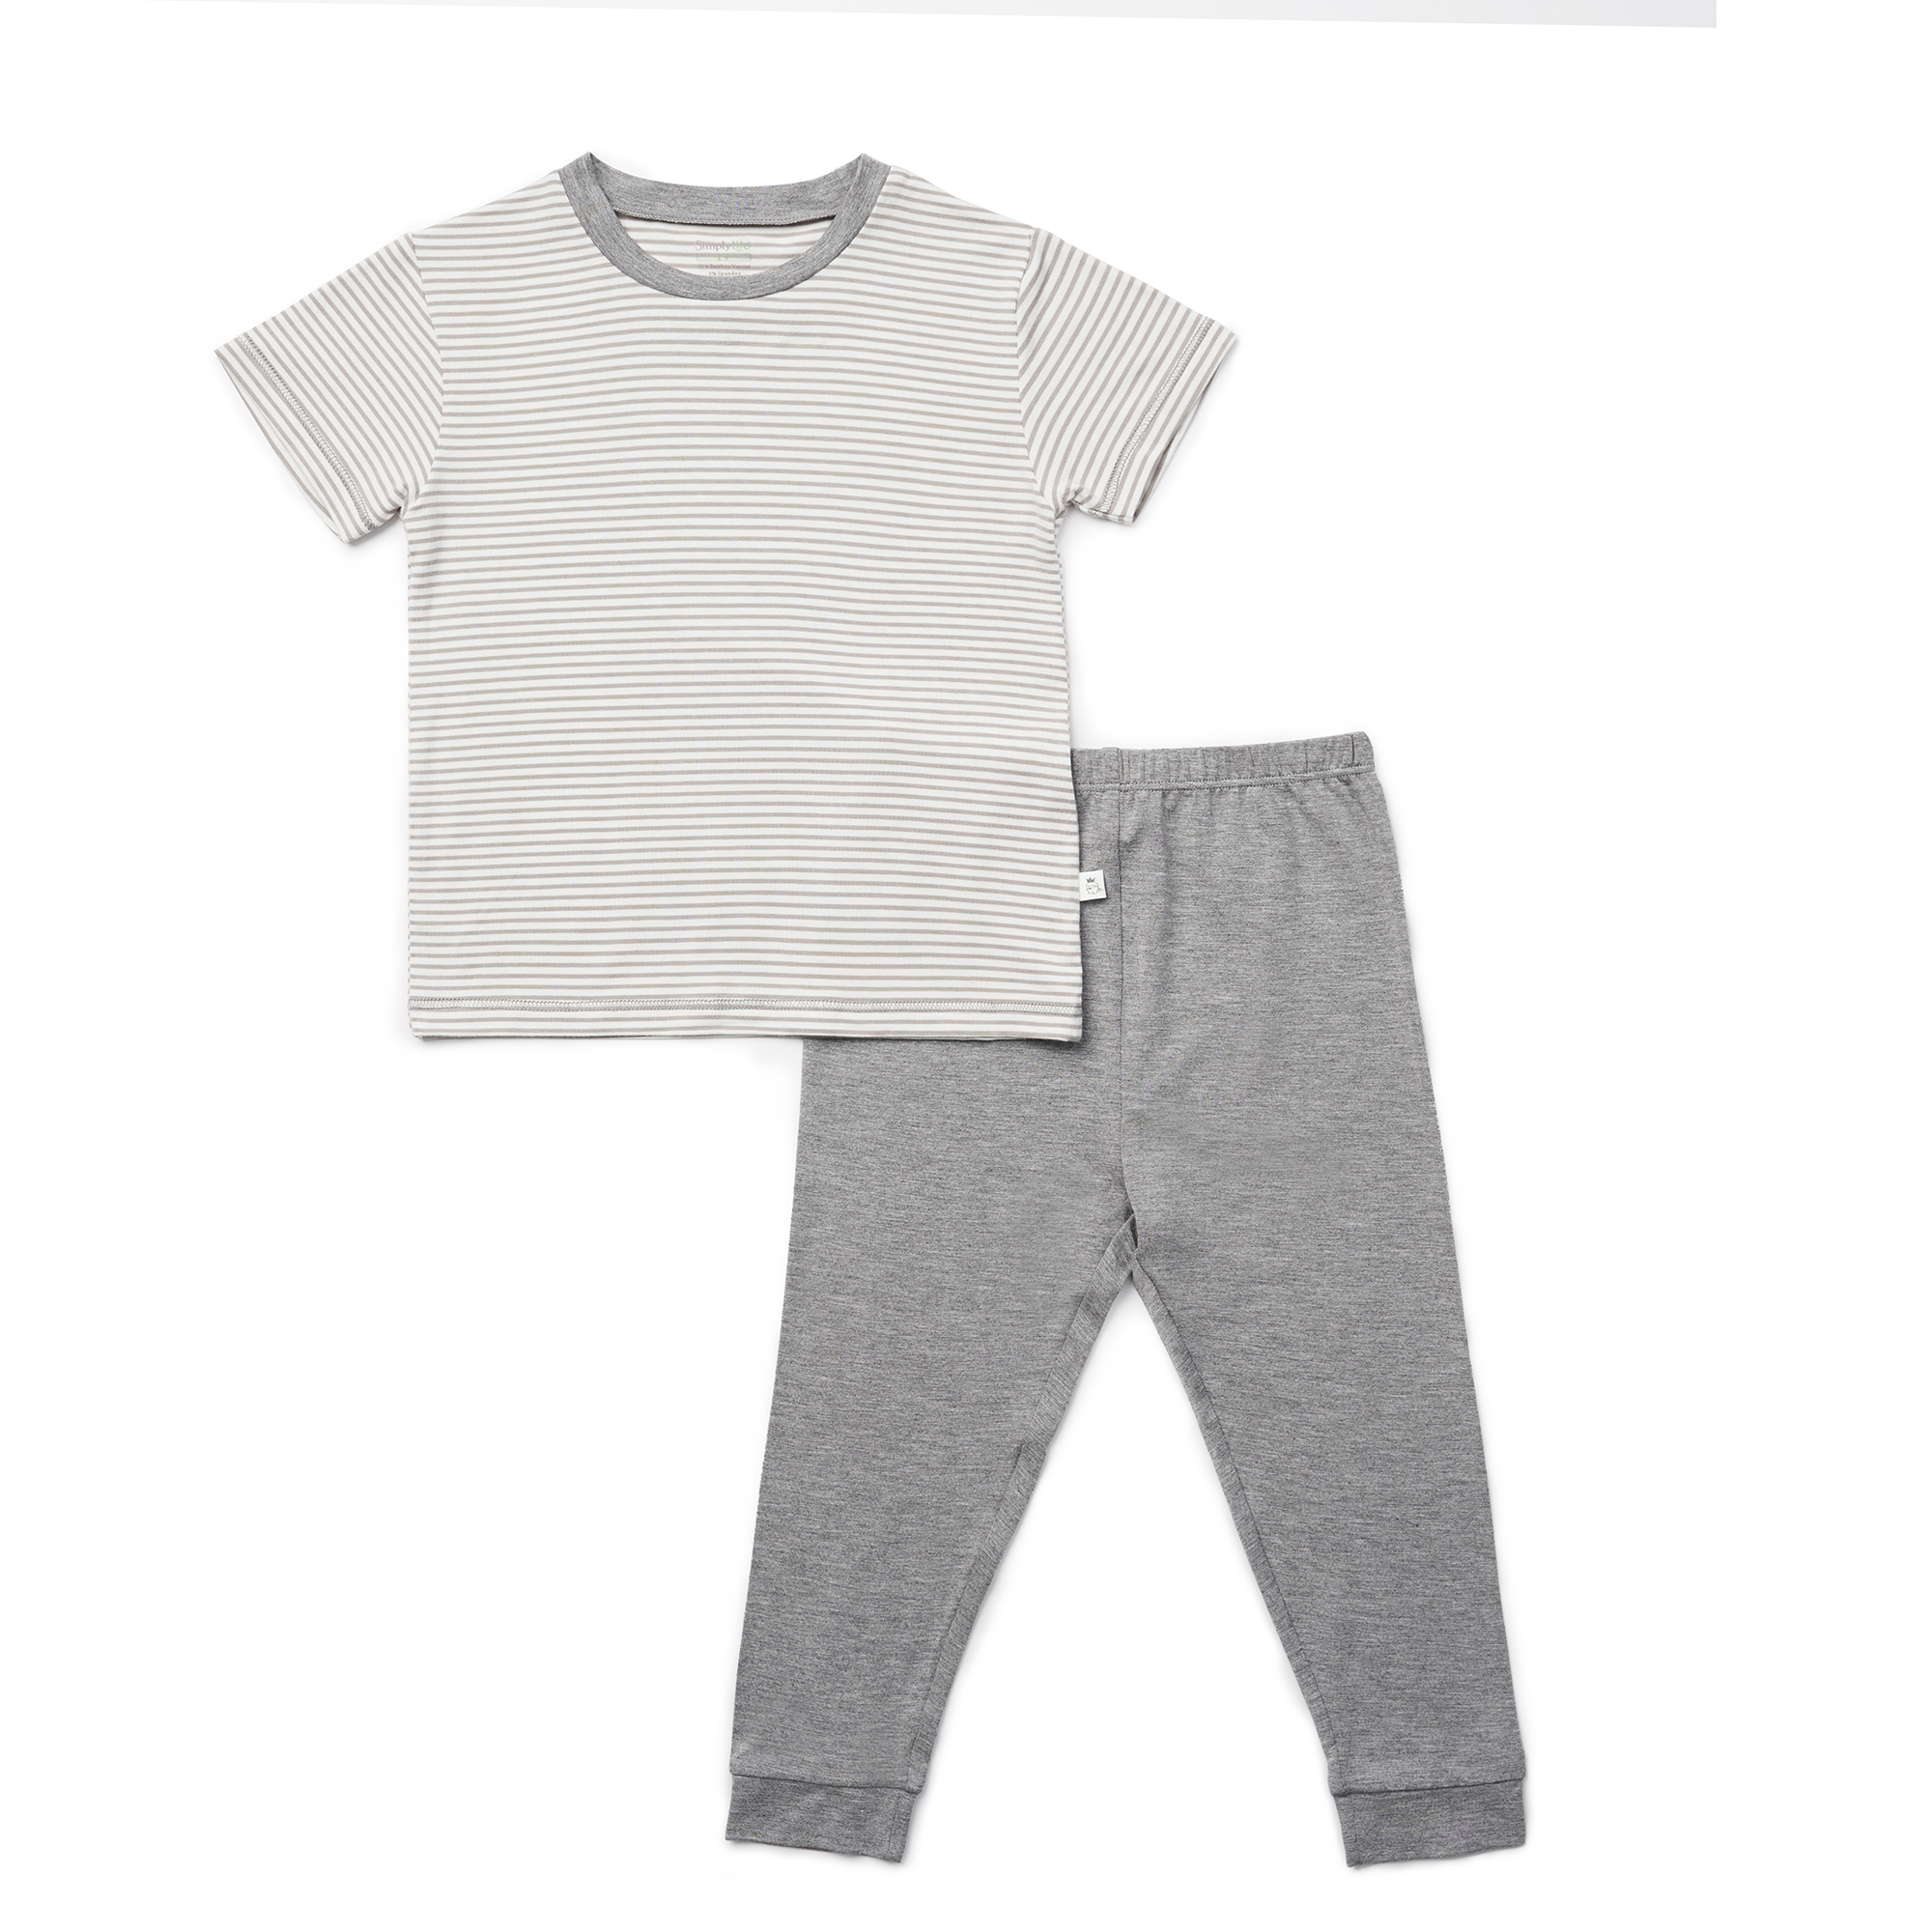 baby-fair Simply Life - Kids Short Sleeve Bamboo Pyjamas Set with Tapered Cuff Pants, Grey Stripes